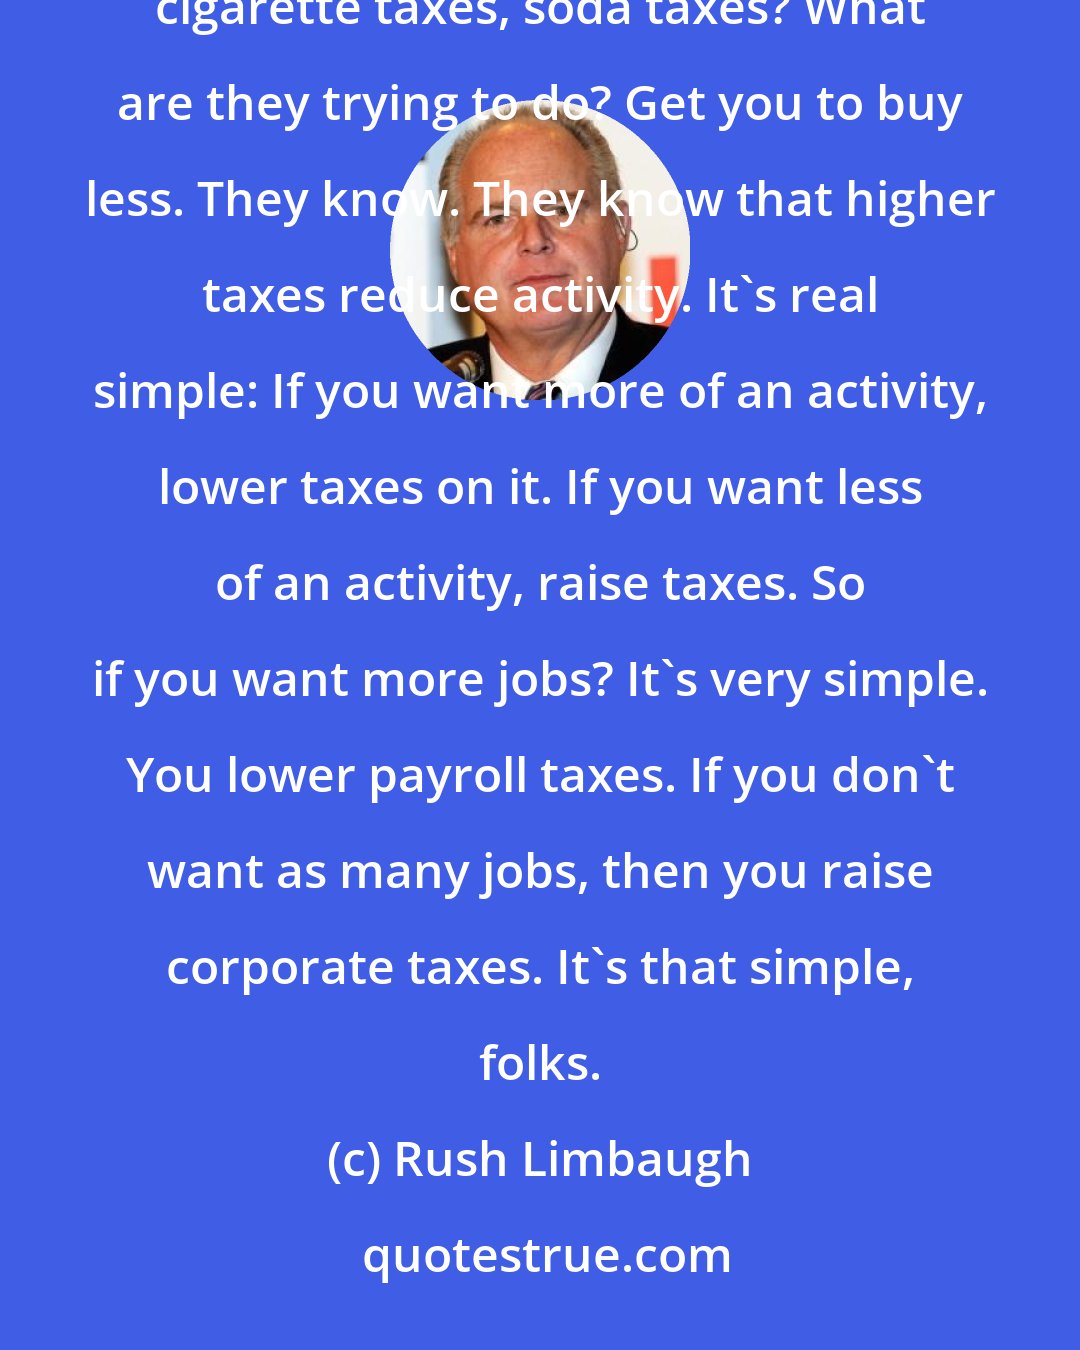 Rush Limbaugh: The left does understand how raising taxes reduces economic activity. How about their desire for increasing cigarette taxes, soda taxes? What are they trying to do? Get you to buy less. They know. They know that higher taxes reduce activity. It's real simple: If you want more of an activity, lower taxes on it. If you want less of an activity, raise taxes. So if you want more jobs? It's very simple. You lower payroll taxes. If you don't want as many jobs, then you raise corporate taxes. It's that simple, folks.